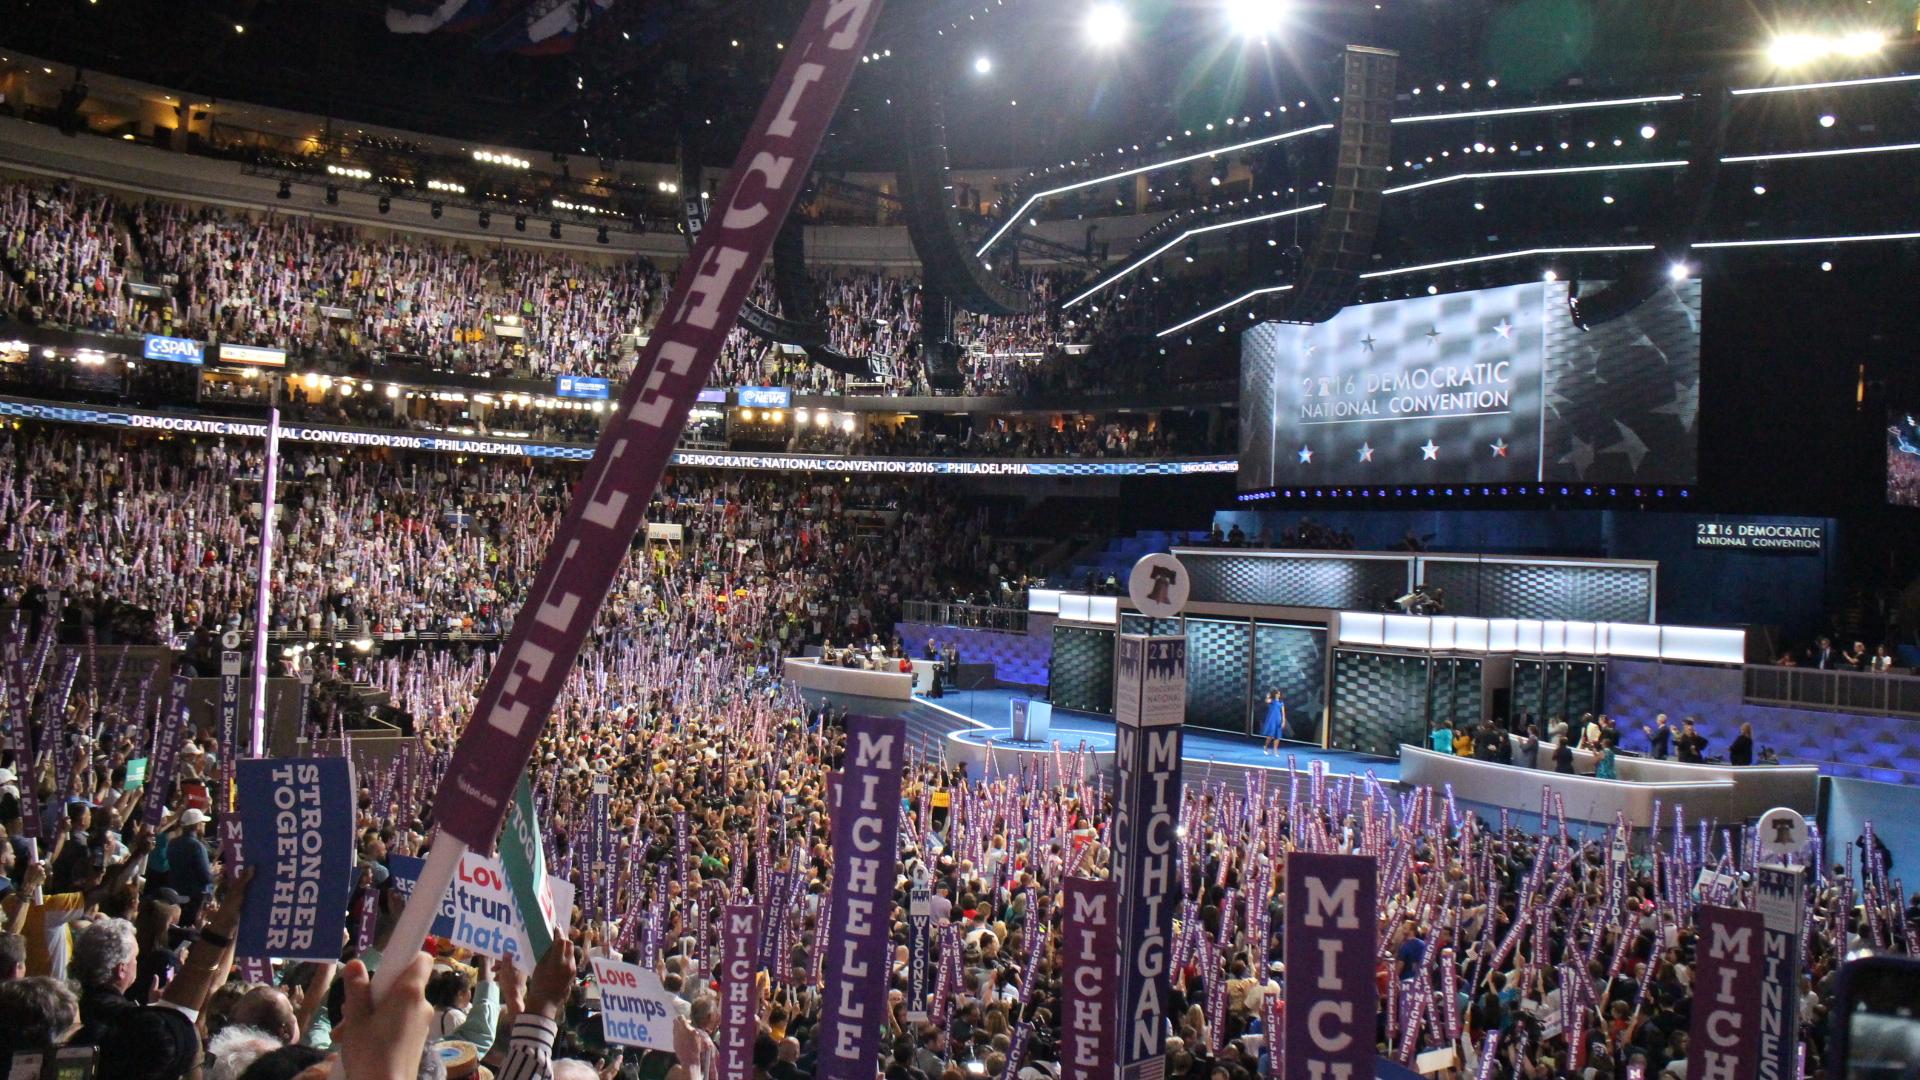 The crowd at the Democratic National Convention waves “Michelle” banners during First Lady Michelle Obama’s speech. The banners were passed out in advance of the speech.